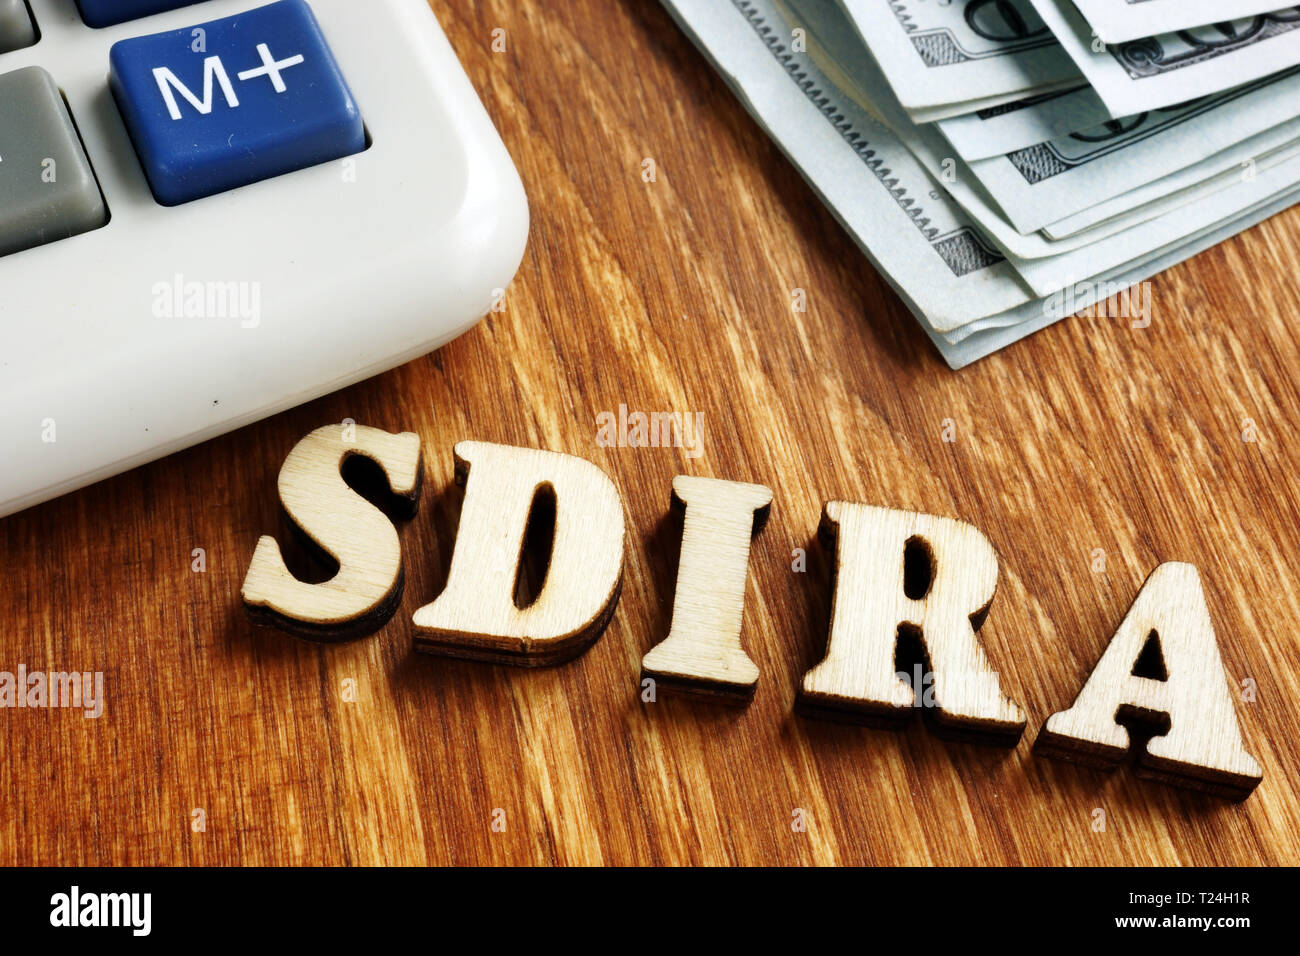 Self Directed IRA - SDIRA wooden letters on desk. Stock Photo